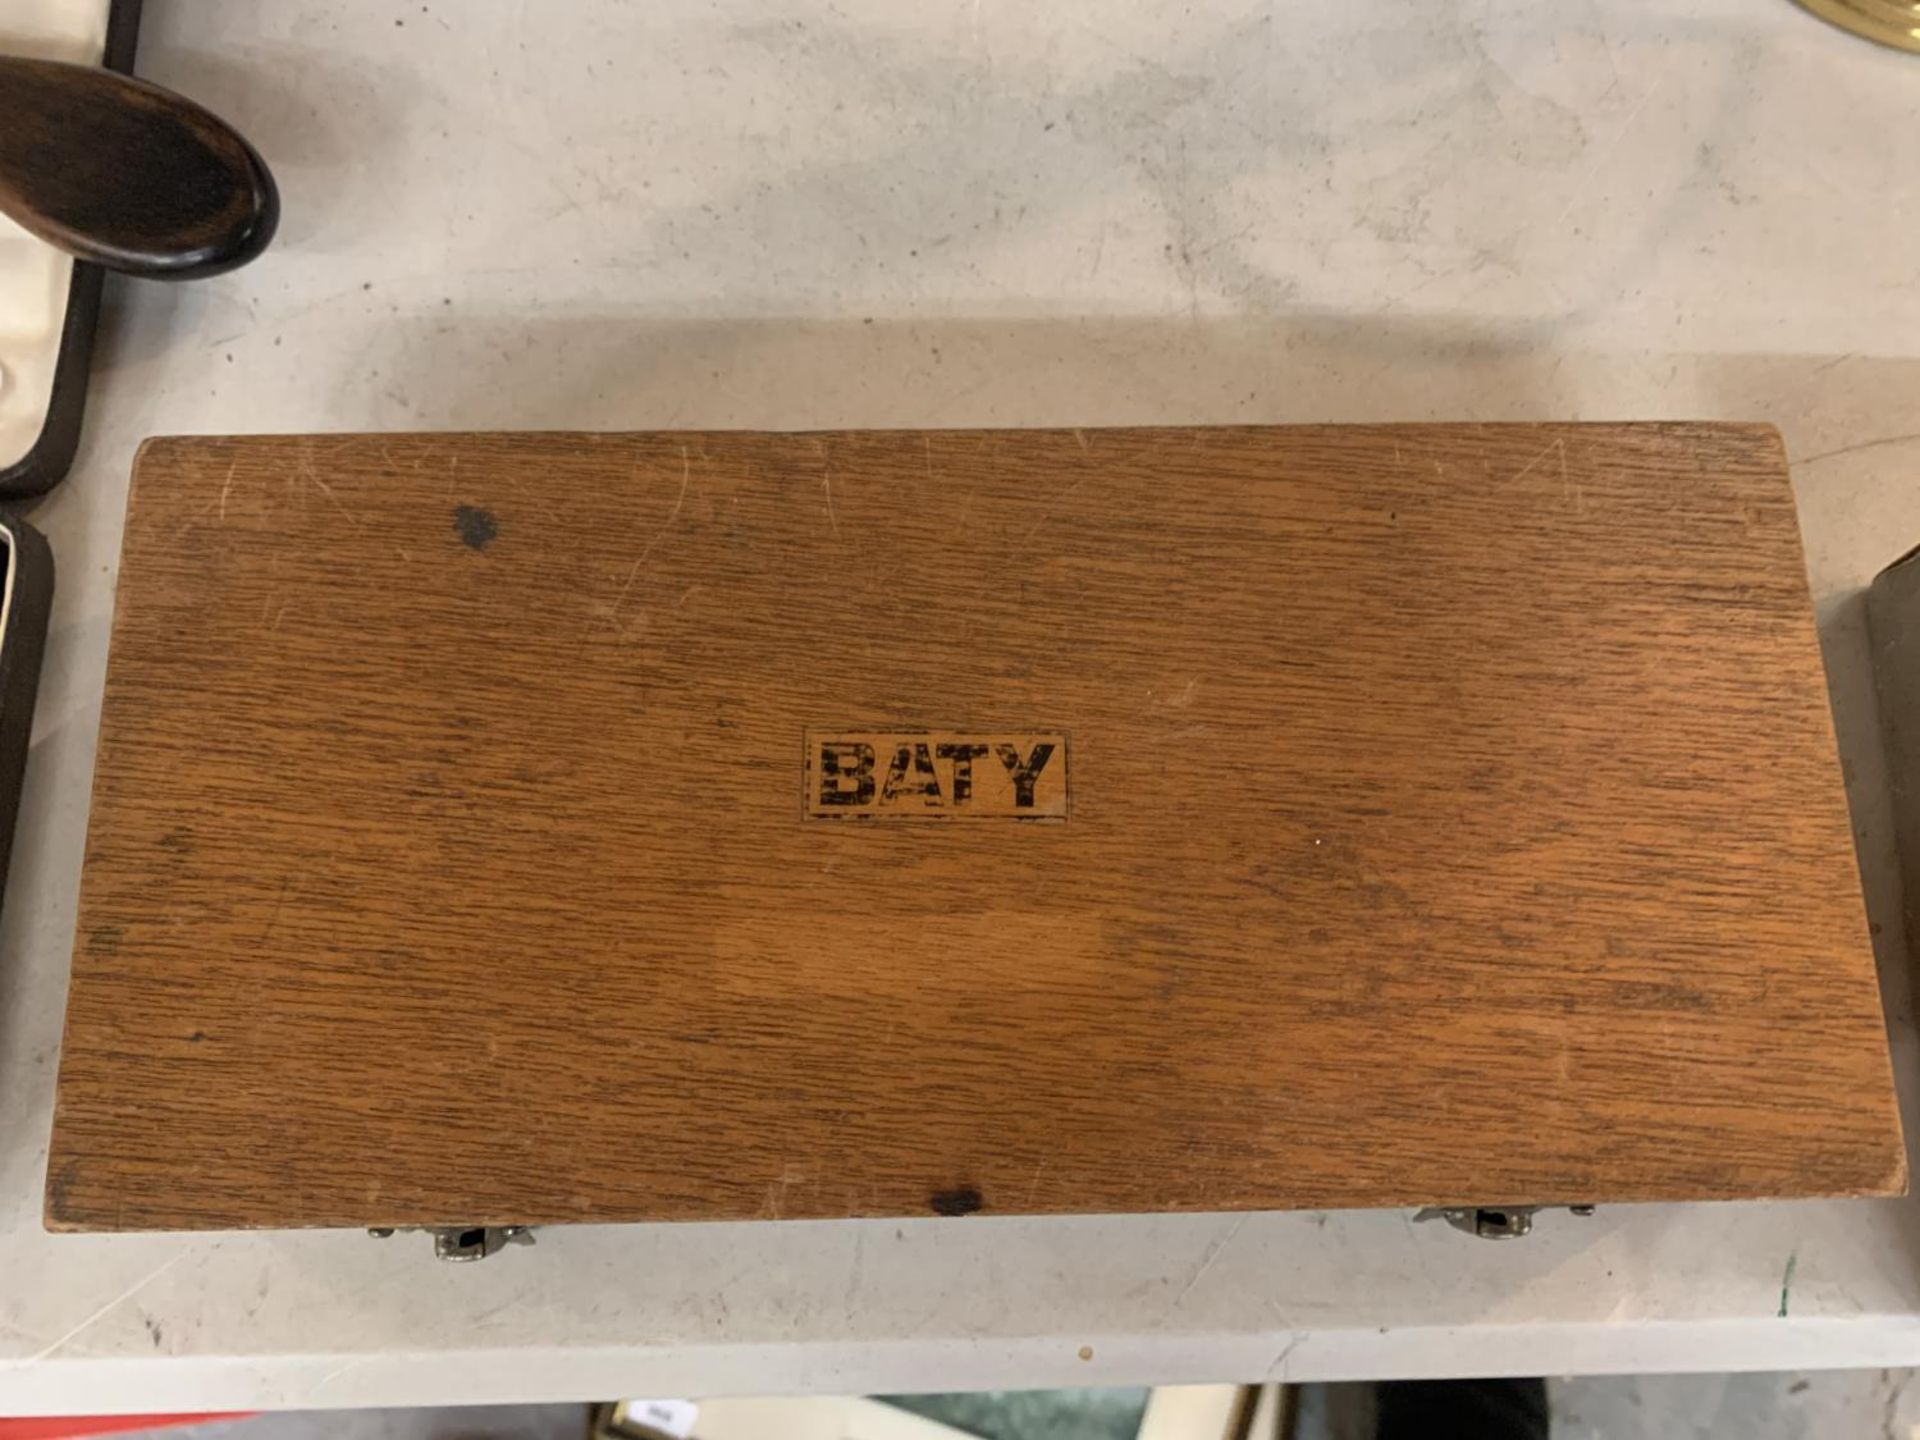 A BATY PRESSURE DIAL GAUGE IN WOODEN CASE - Image 3 of 3